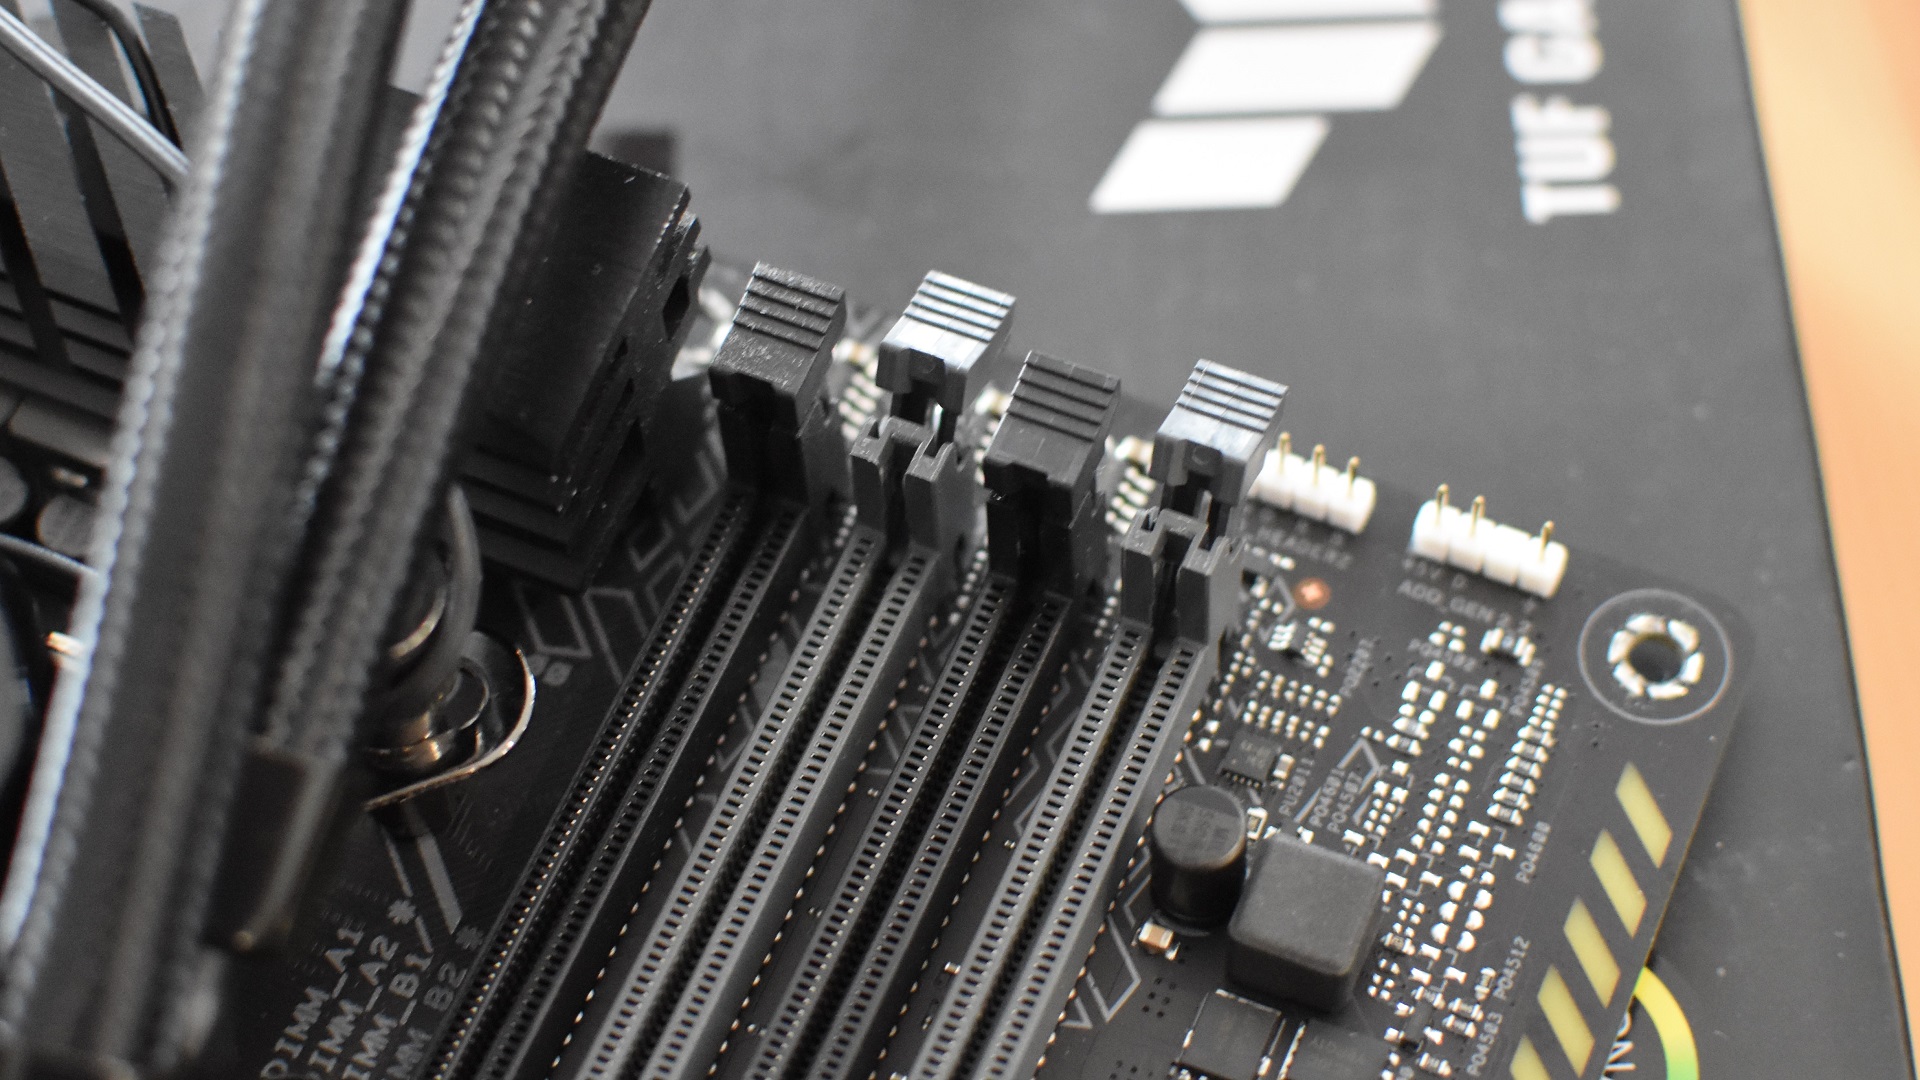 Step 2 of how to install RAM: identify the correct RAM slots to use, then open their plastic retention clips.